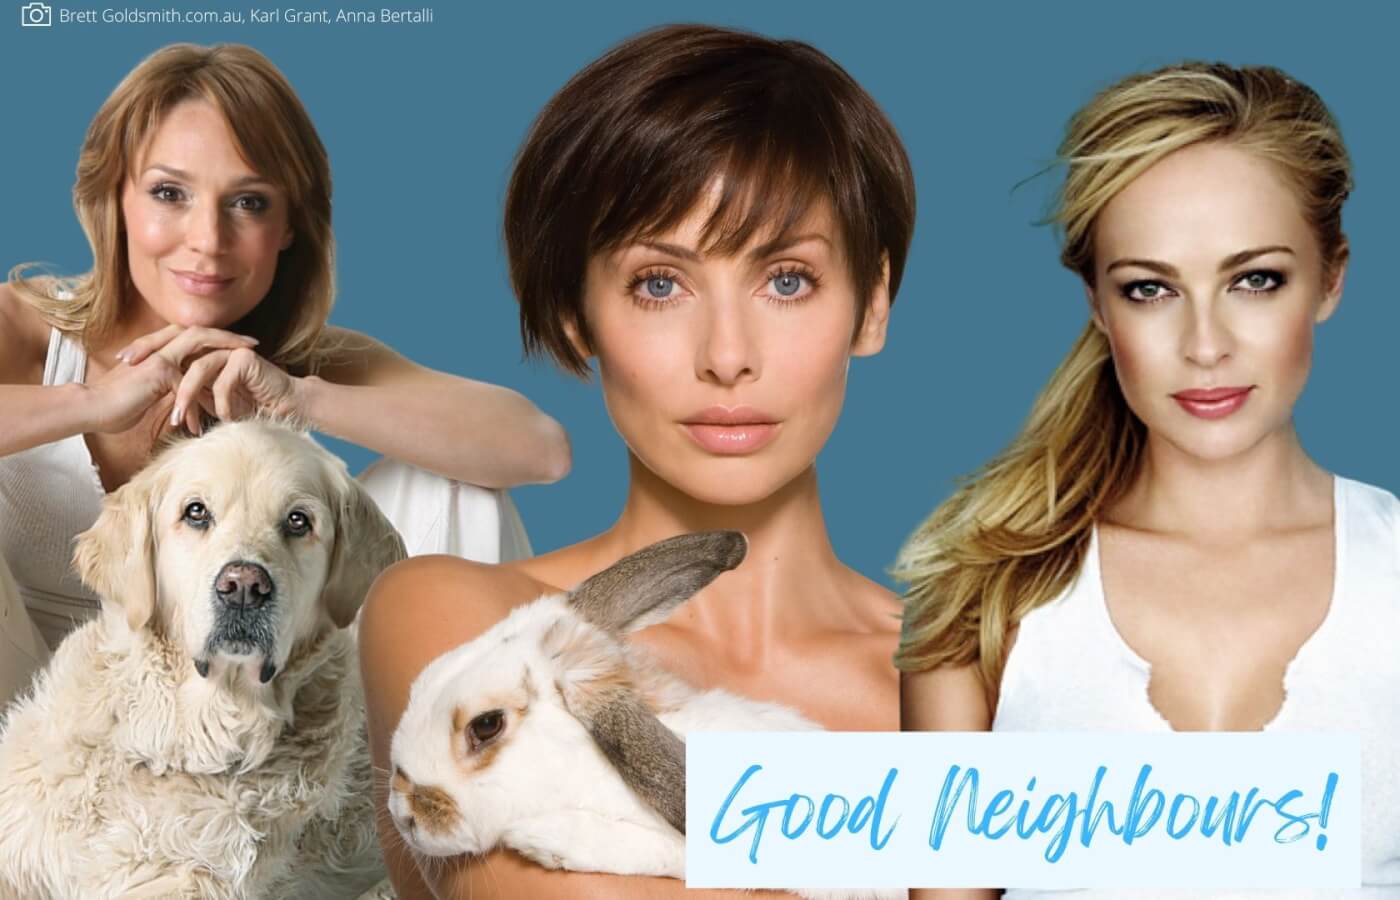 Good Neighbours: Eight Times the Iconic Soap and Its Stars Put Animal Rights in the Spotlight